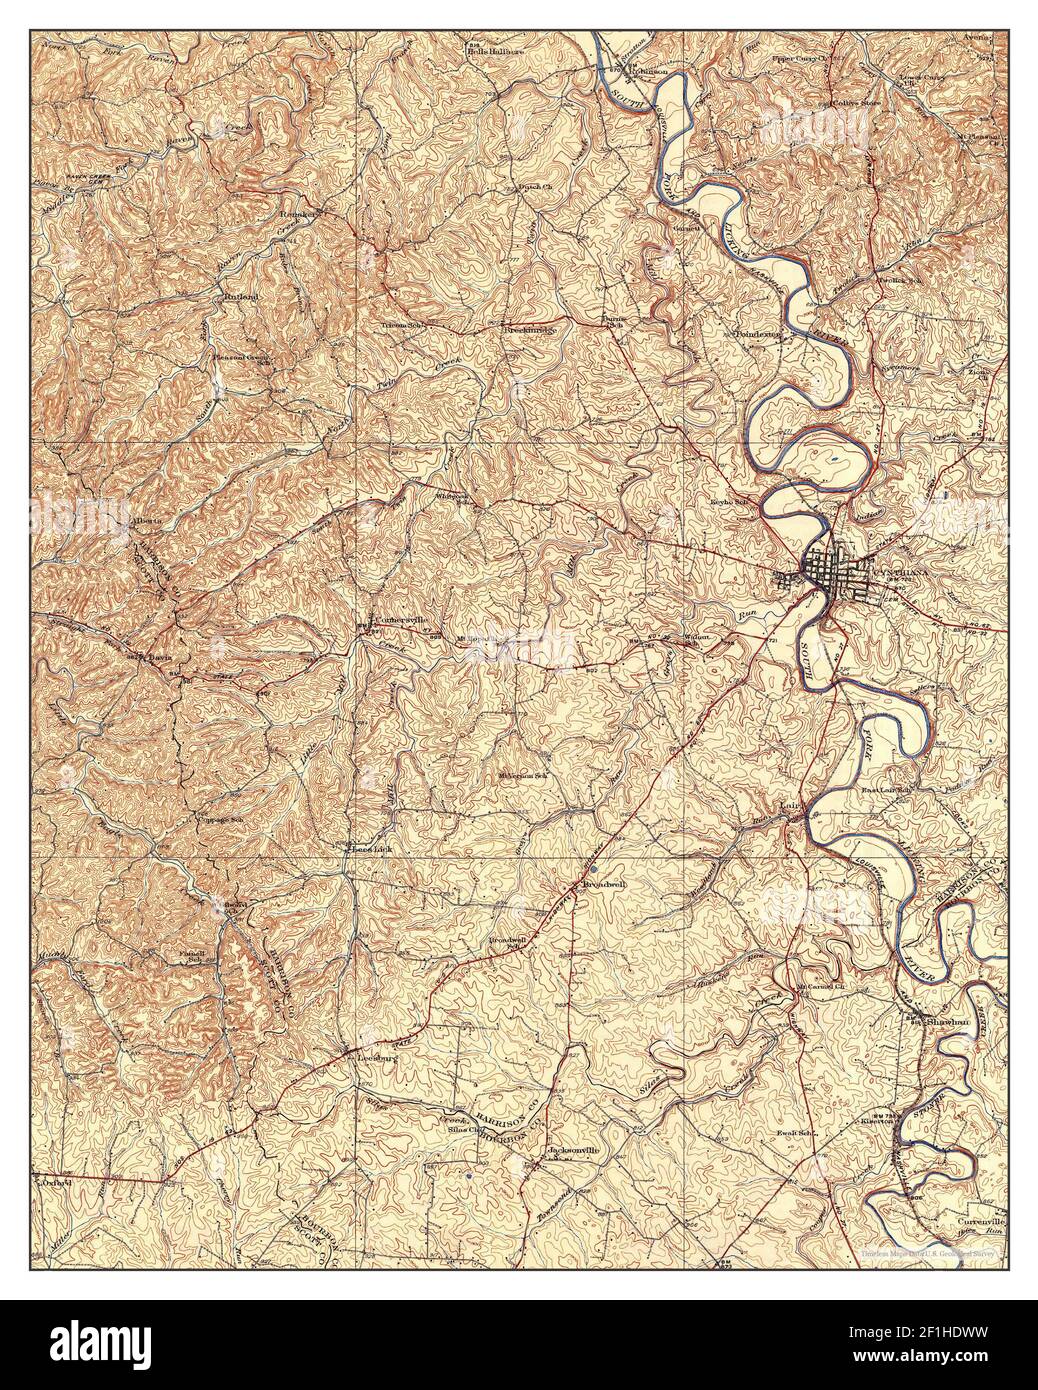 Cynthiana Kentucky Map 1934 162500 United States Of America By Timeless Maps Data Us Geological Survey 2F1HDWW 